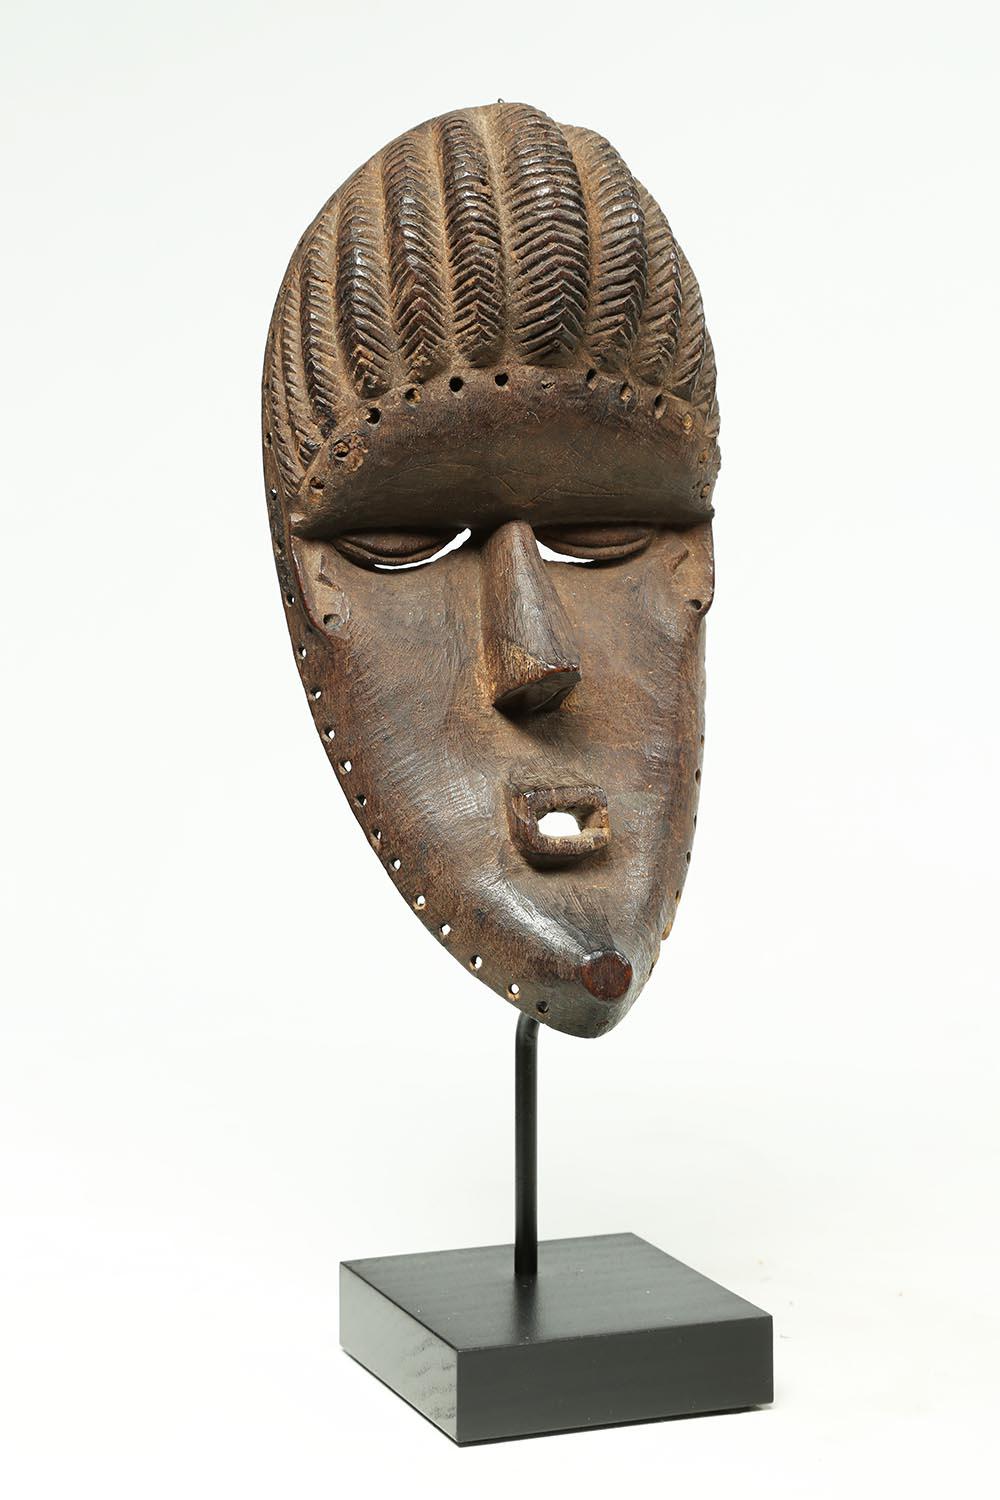 Liberian Bassa Tribal Wood Dance Mask with Geometric Features, Early 20th Century, Africa